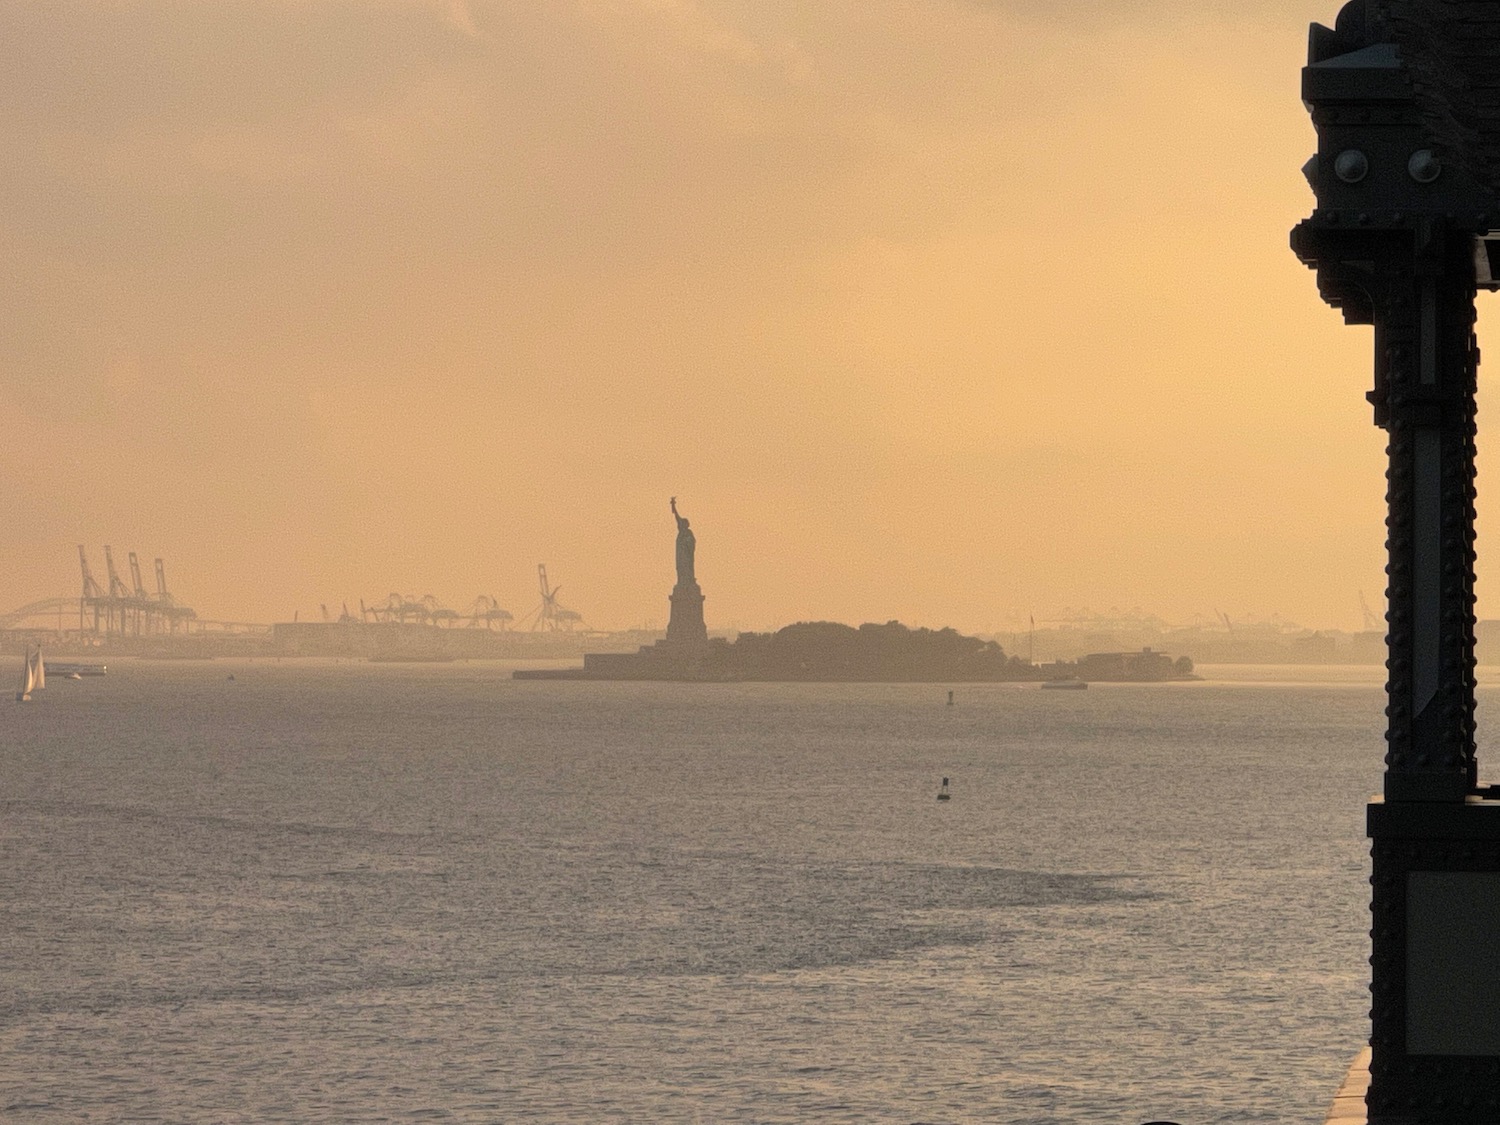 a statue of liberty in the distance